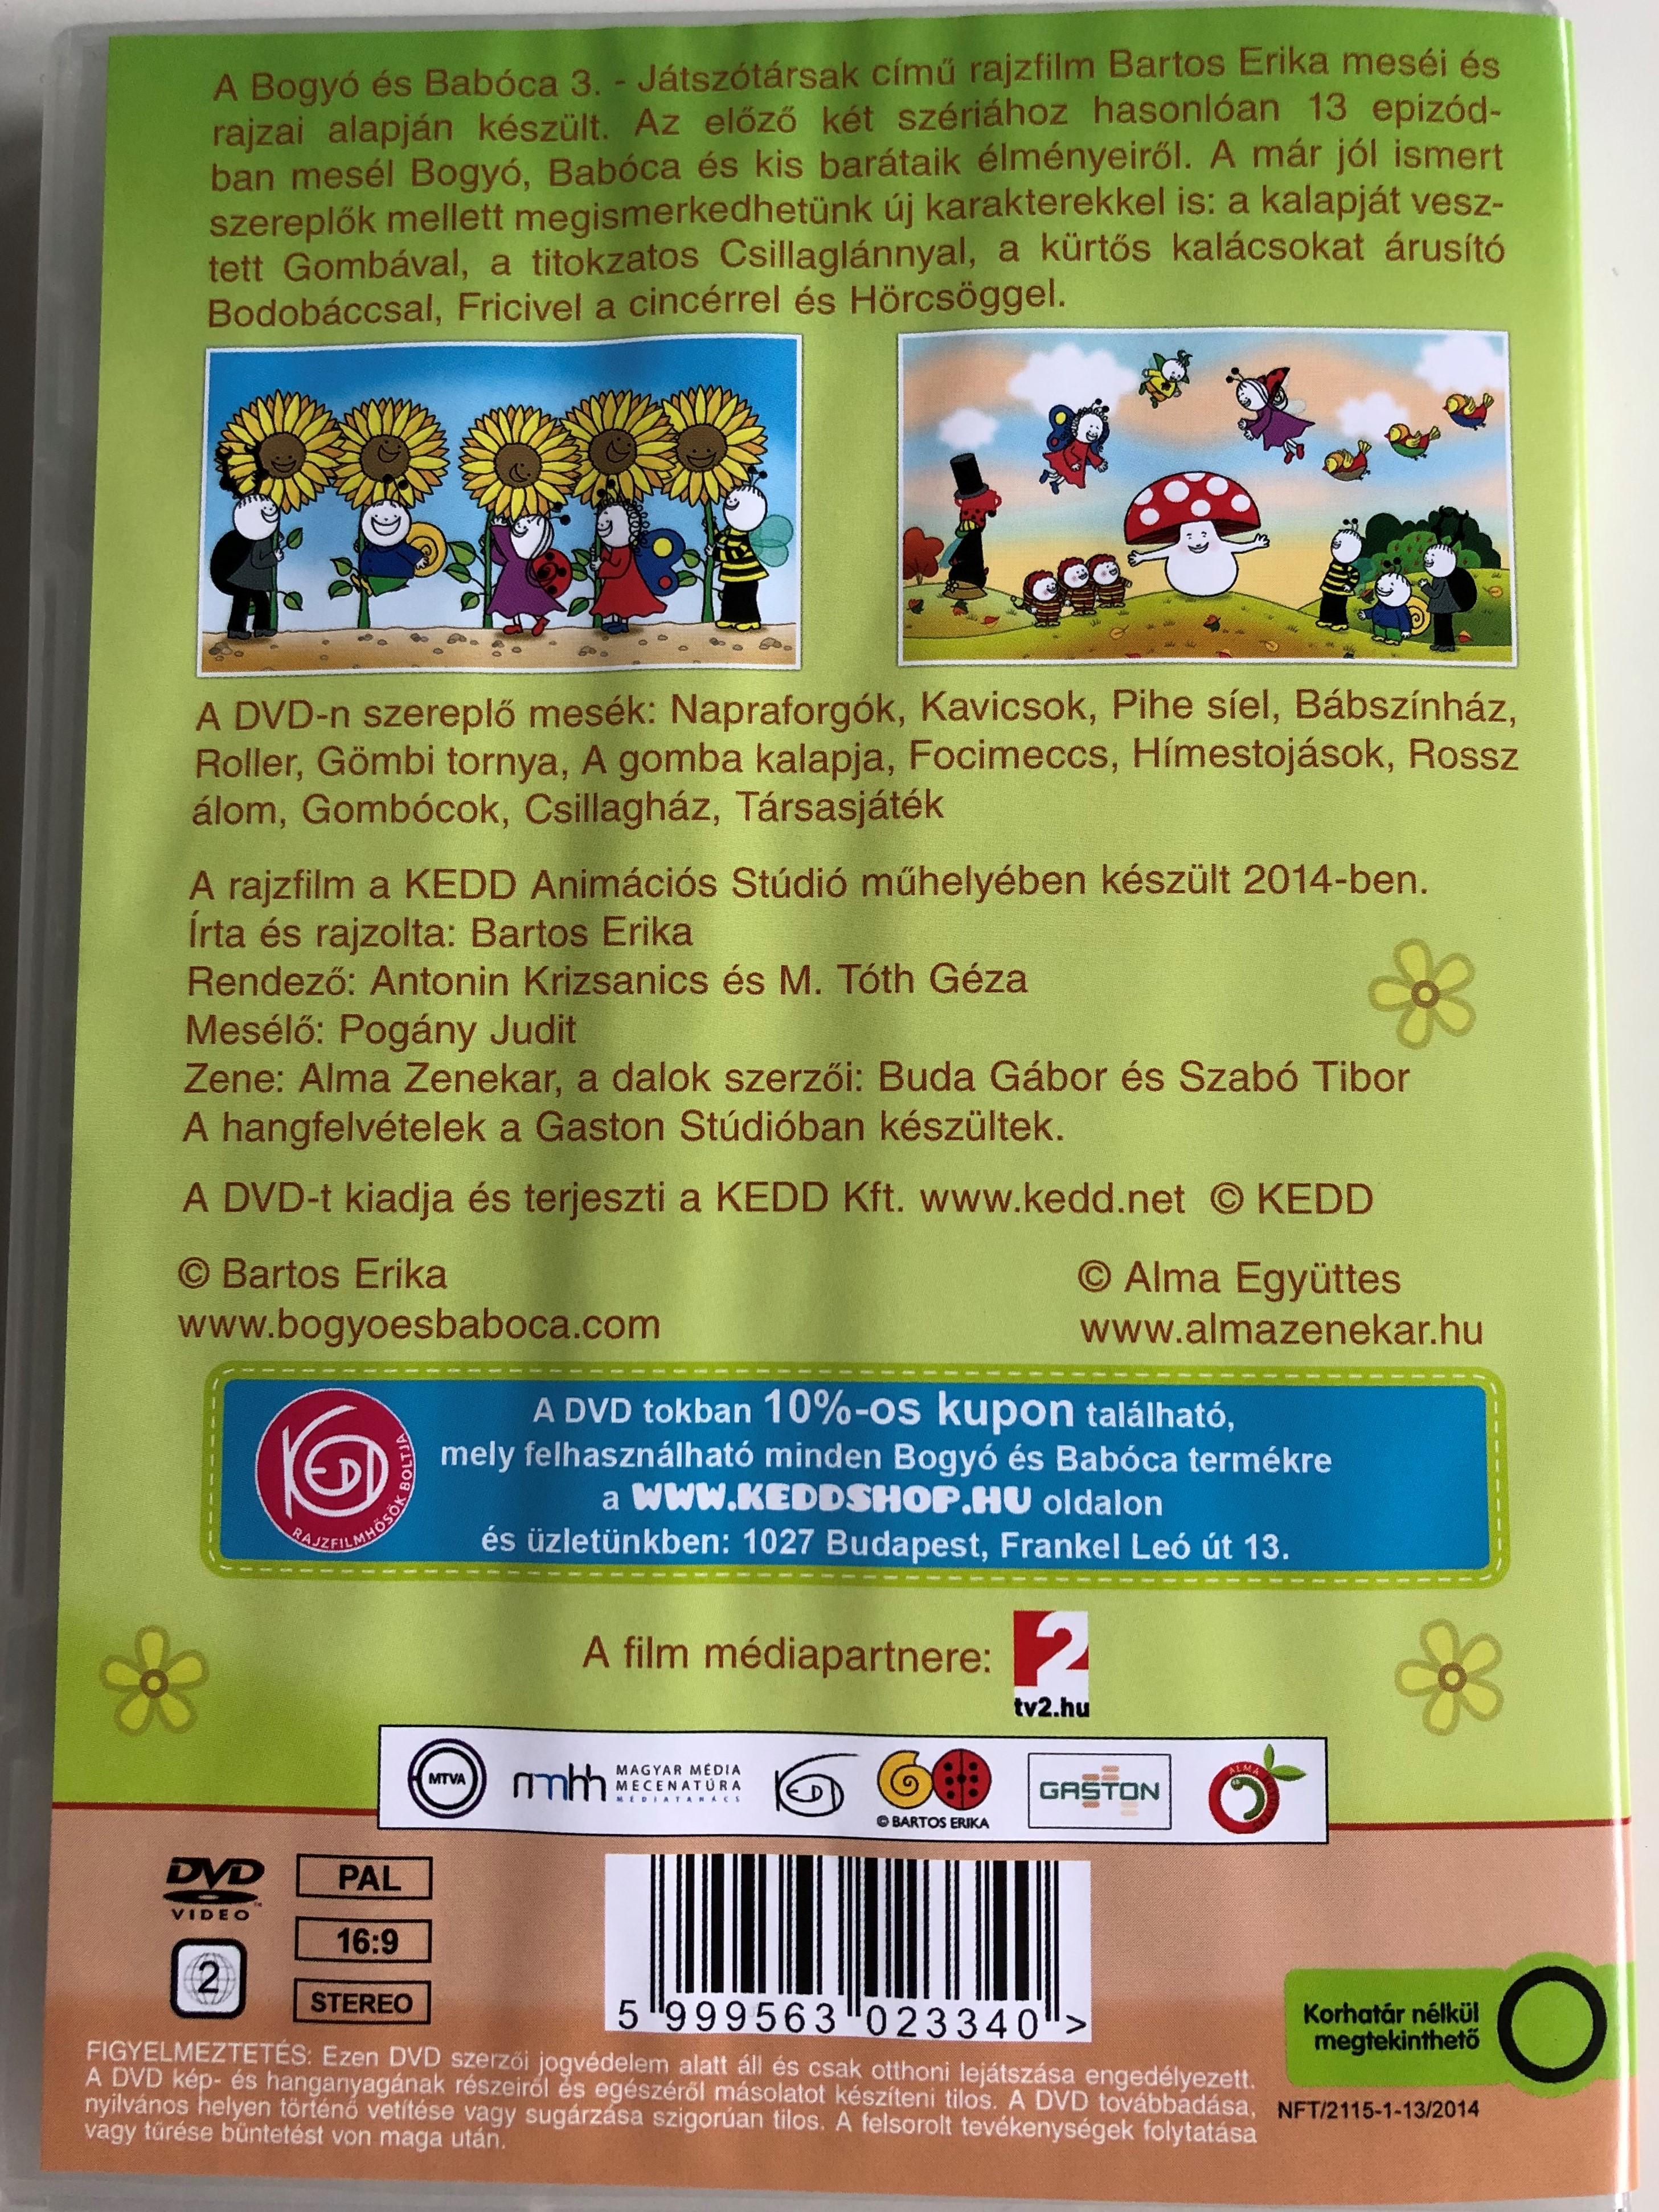 bogy-s-bab-ca-dvd-2011-3.-r-sz-directed-by-antonin-krizsanics-narrated-by-poh-ny-judit-13-j-mese-13-new-hungarian-stories-for-children-by-bartos-erika-2-.jpg